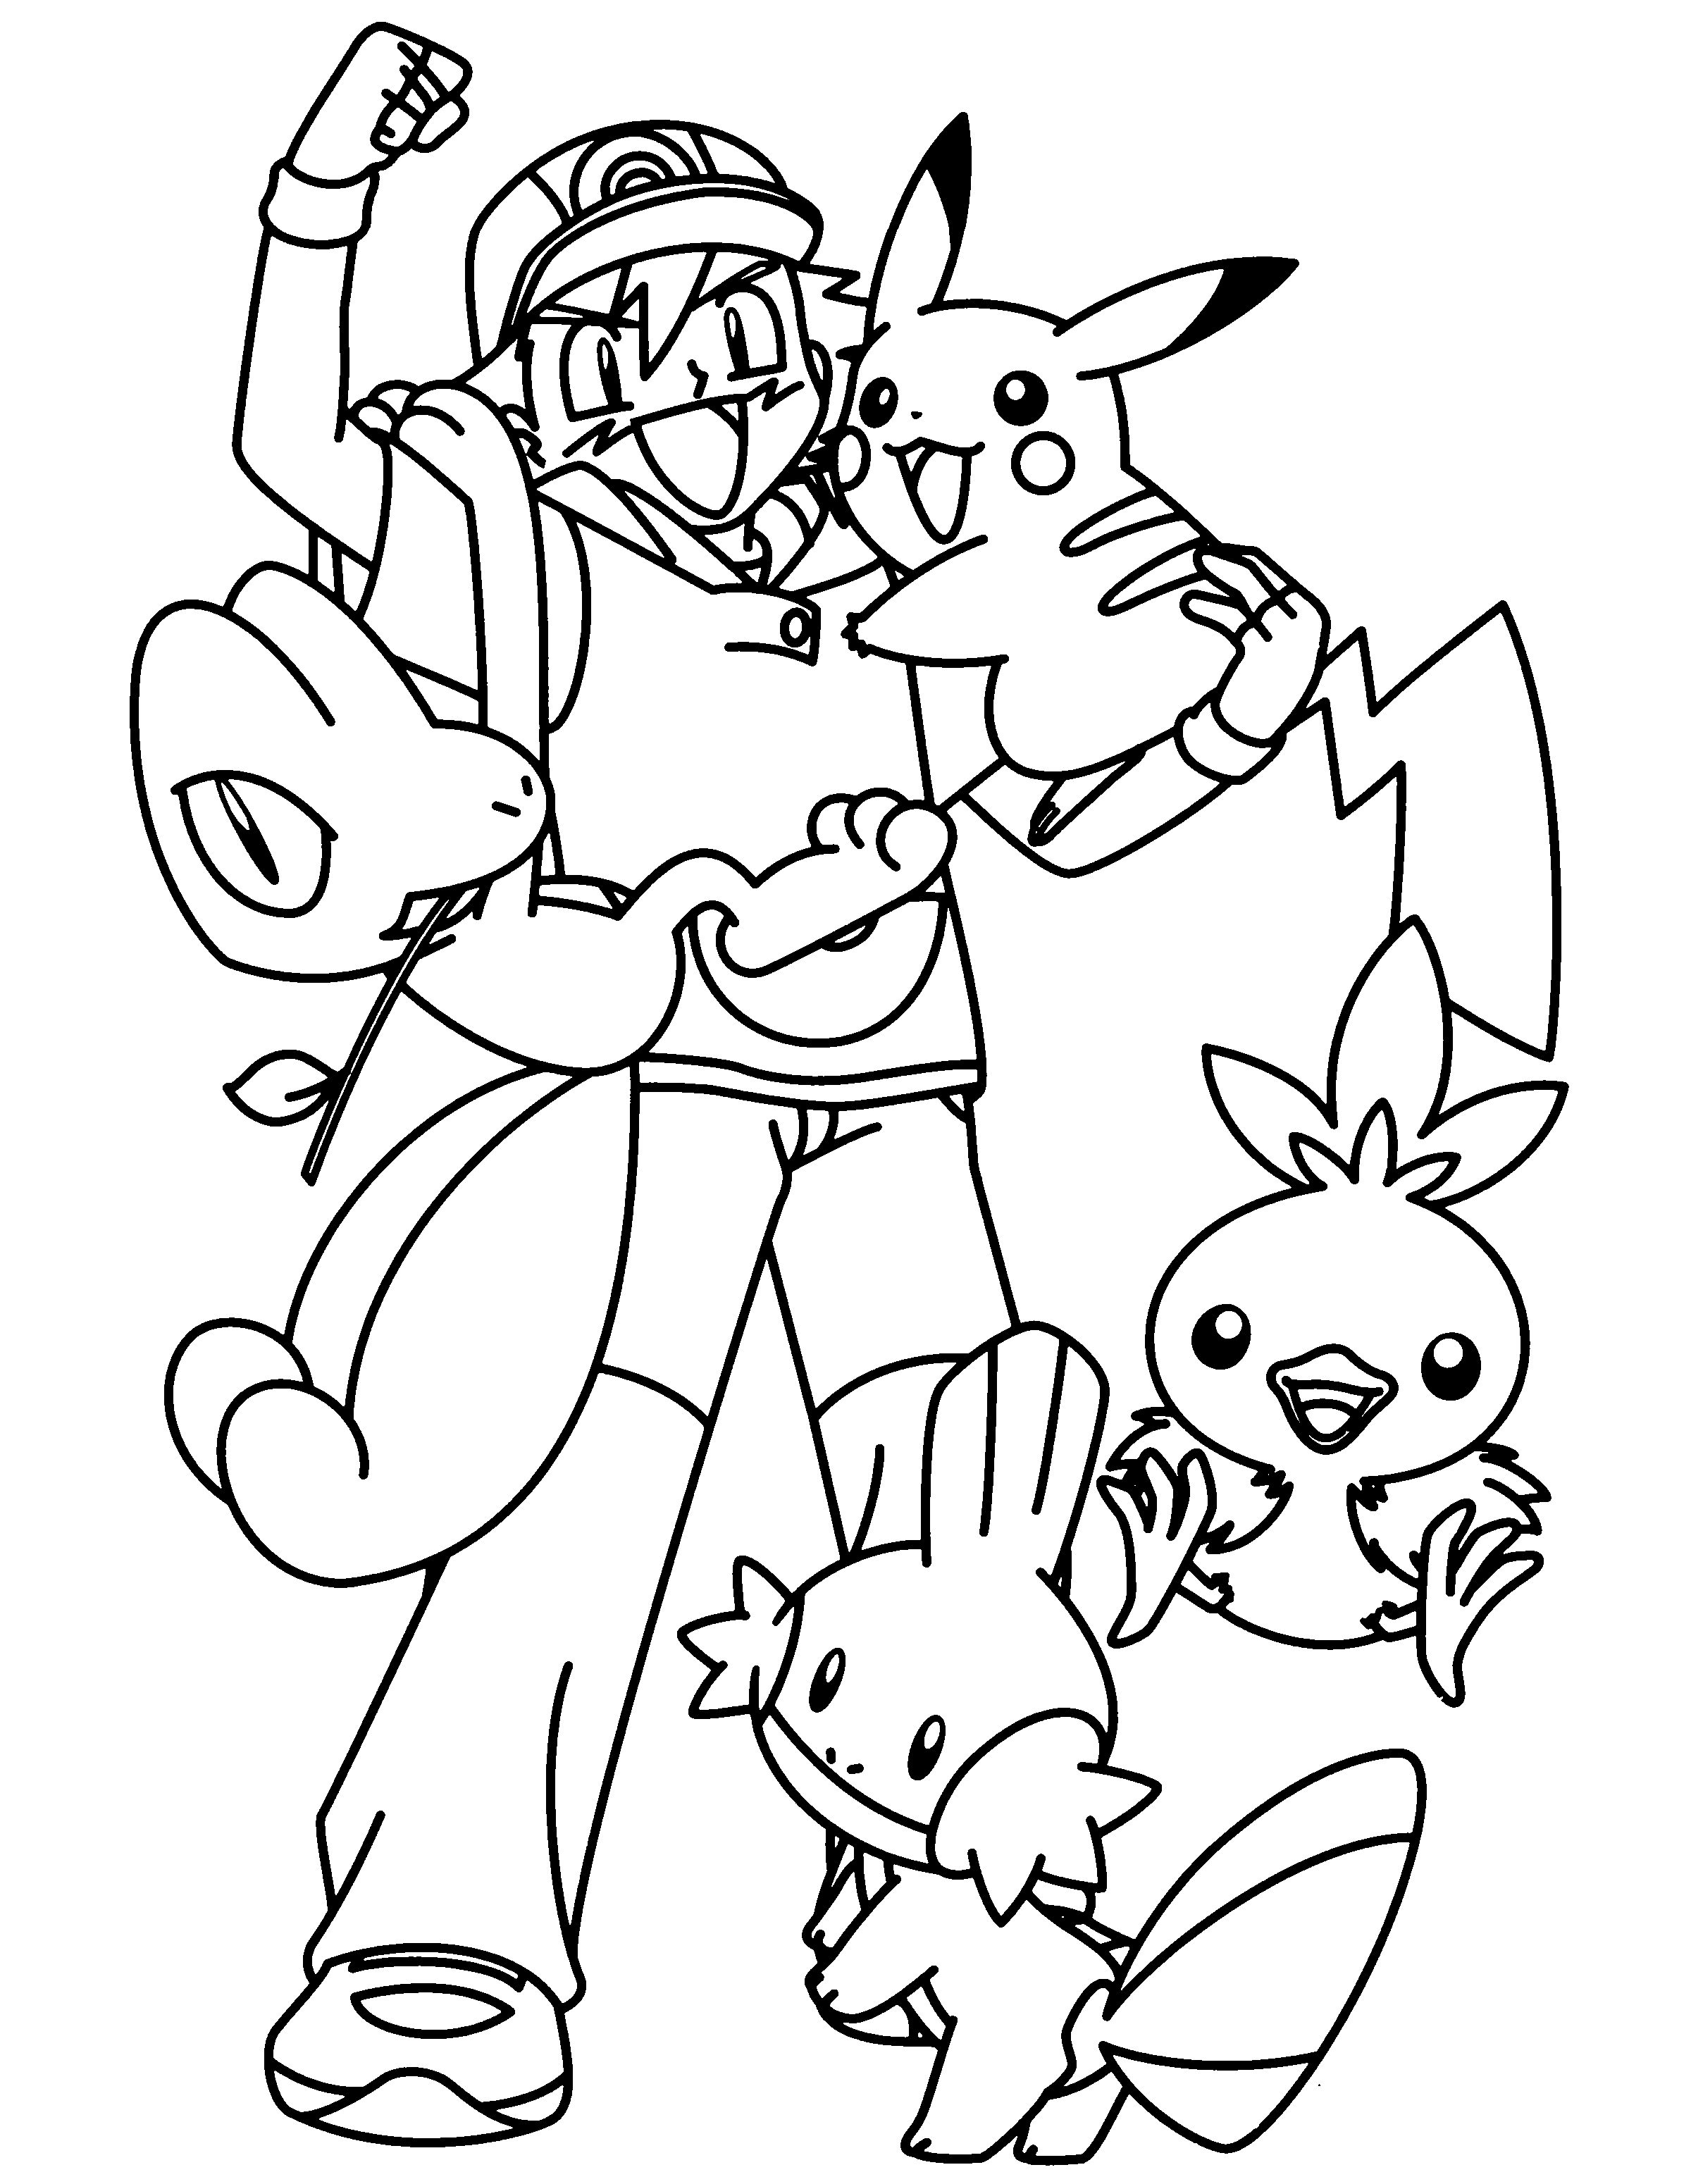 Download Pokemon Go Coloring Pages Best Coloring Pages For Kids